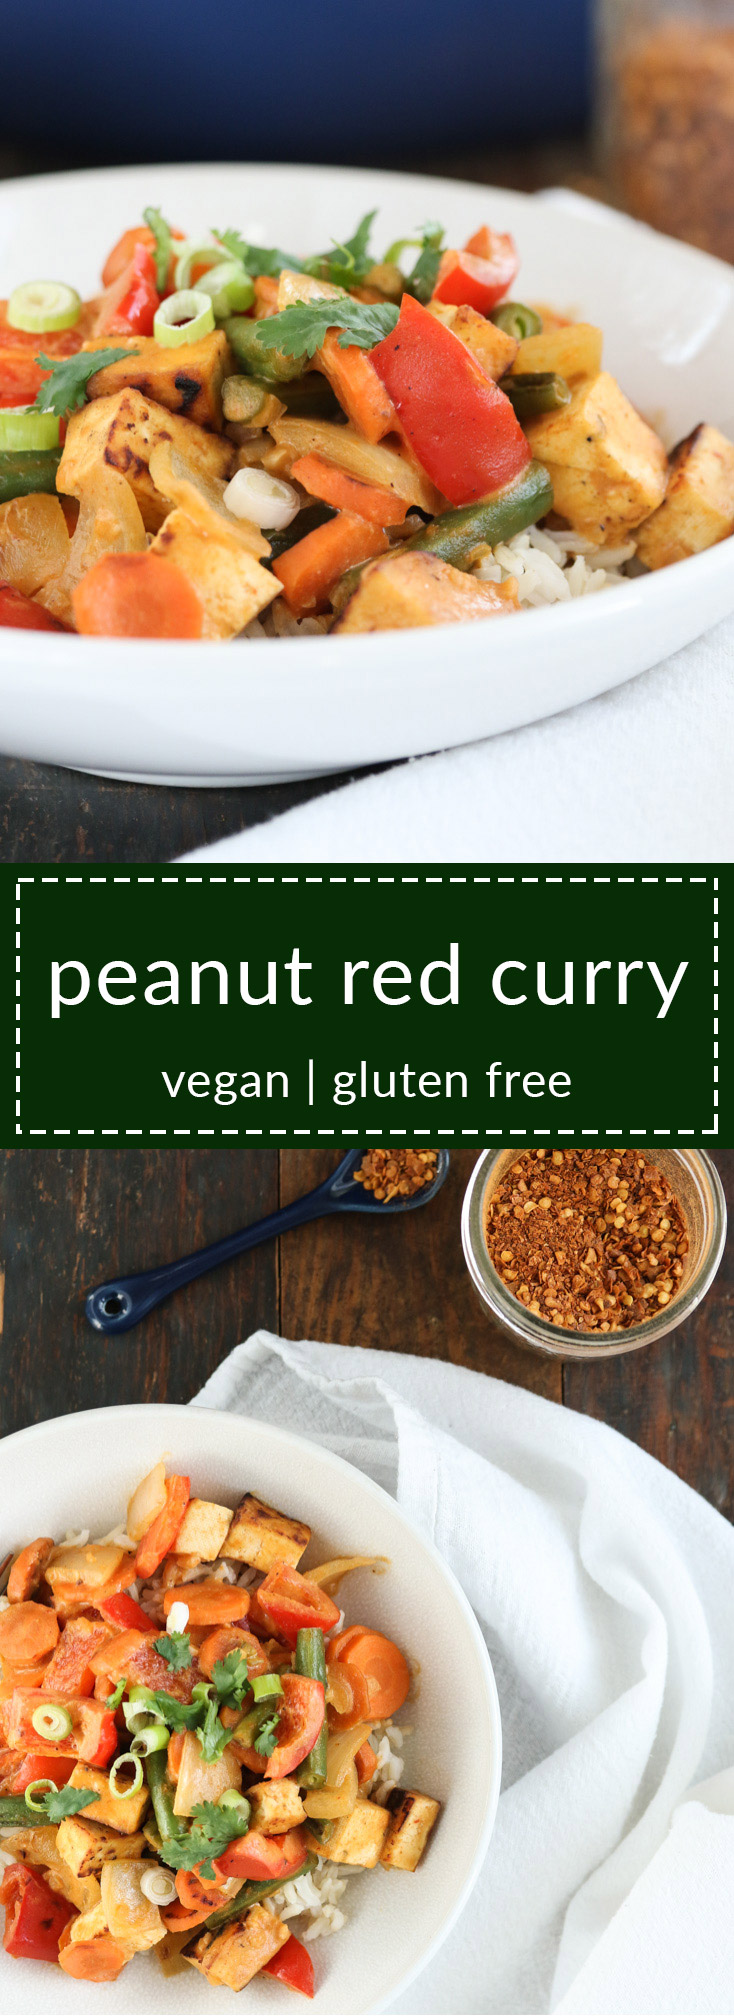 peanut red curry is comforting and easy to prepare in advance (plus the leftovers are excellent).  adaptable to your favorite protein and veggies.